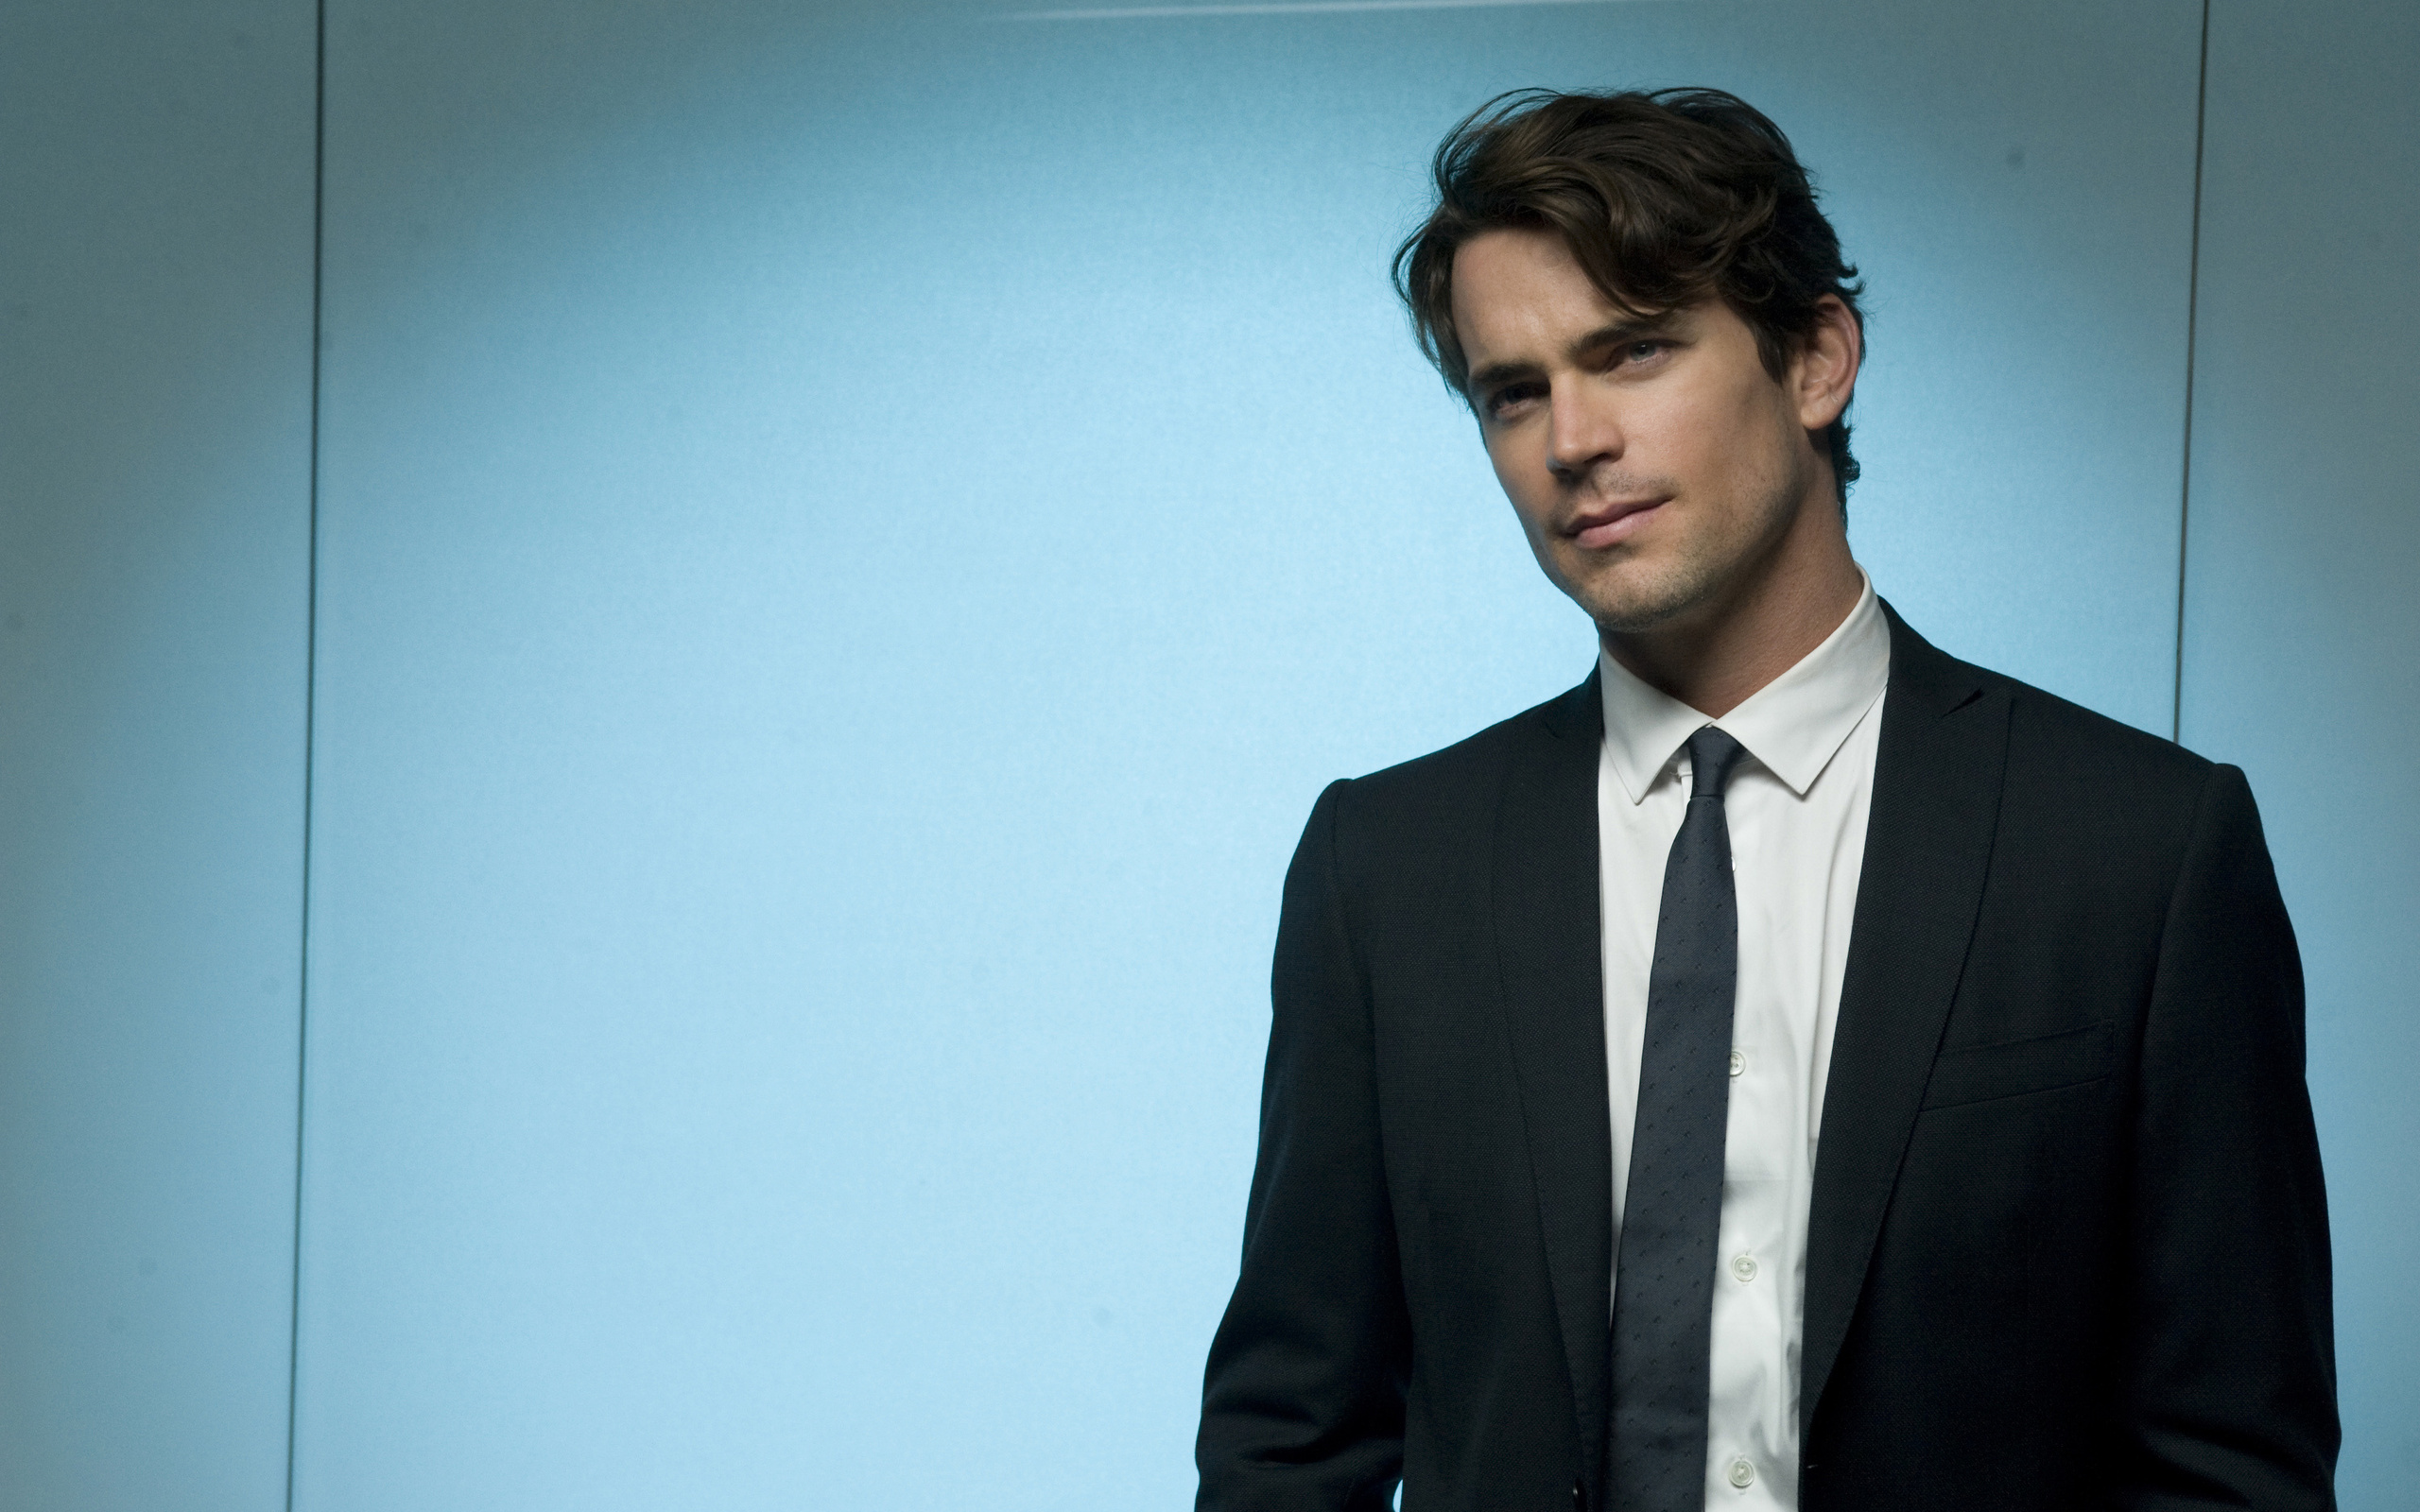 Wallpaper Of White Collar You Are Ing